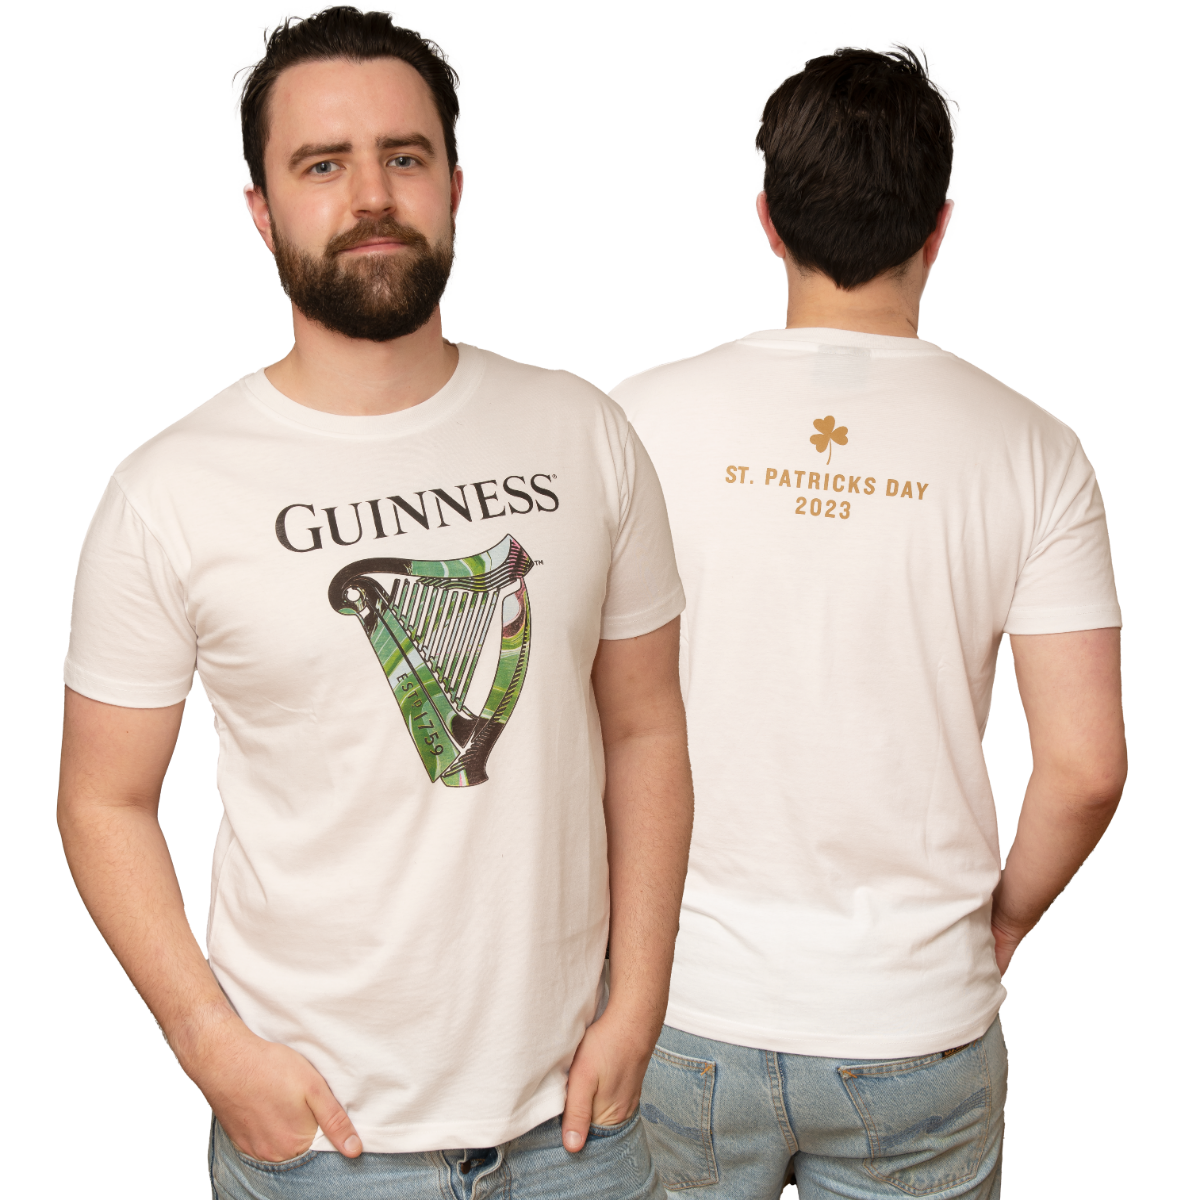 Guinness Limited Edition St Patrick's Day 2023 White Tee